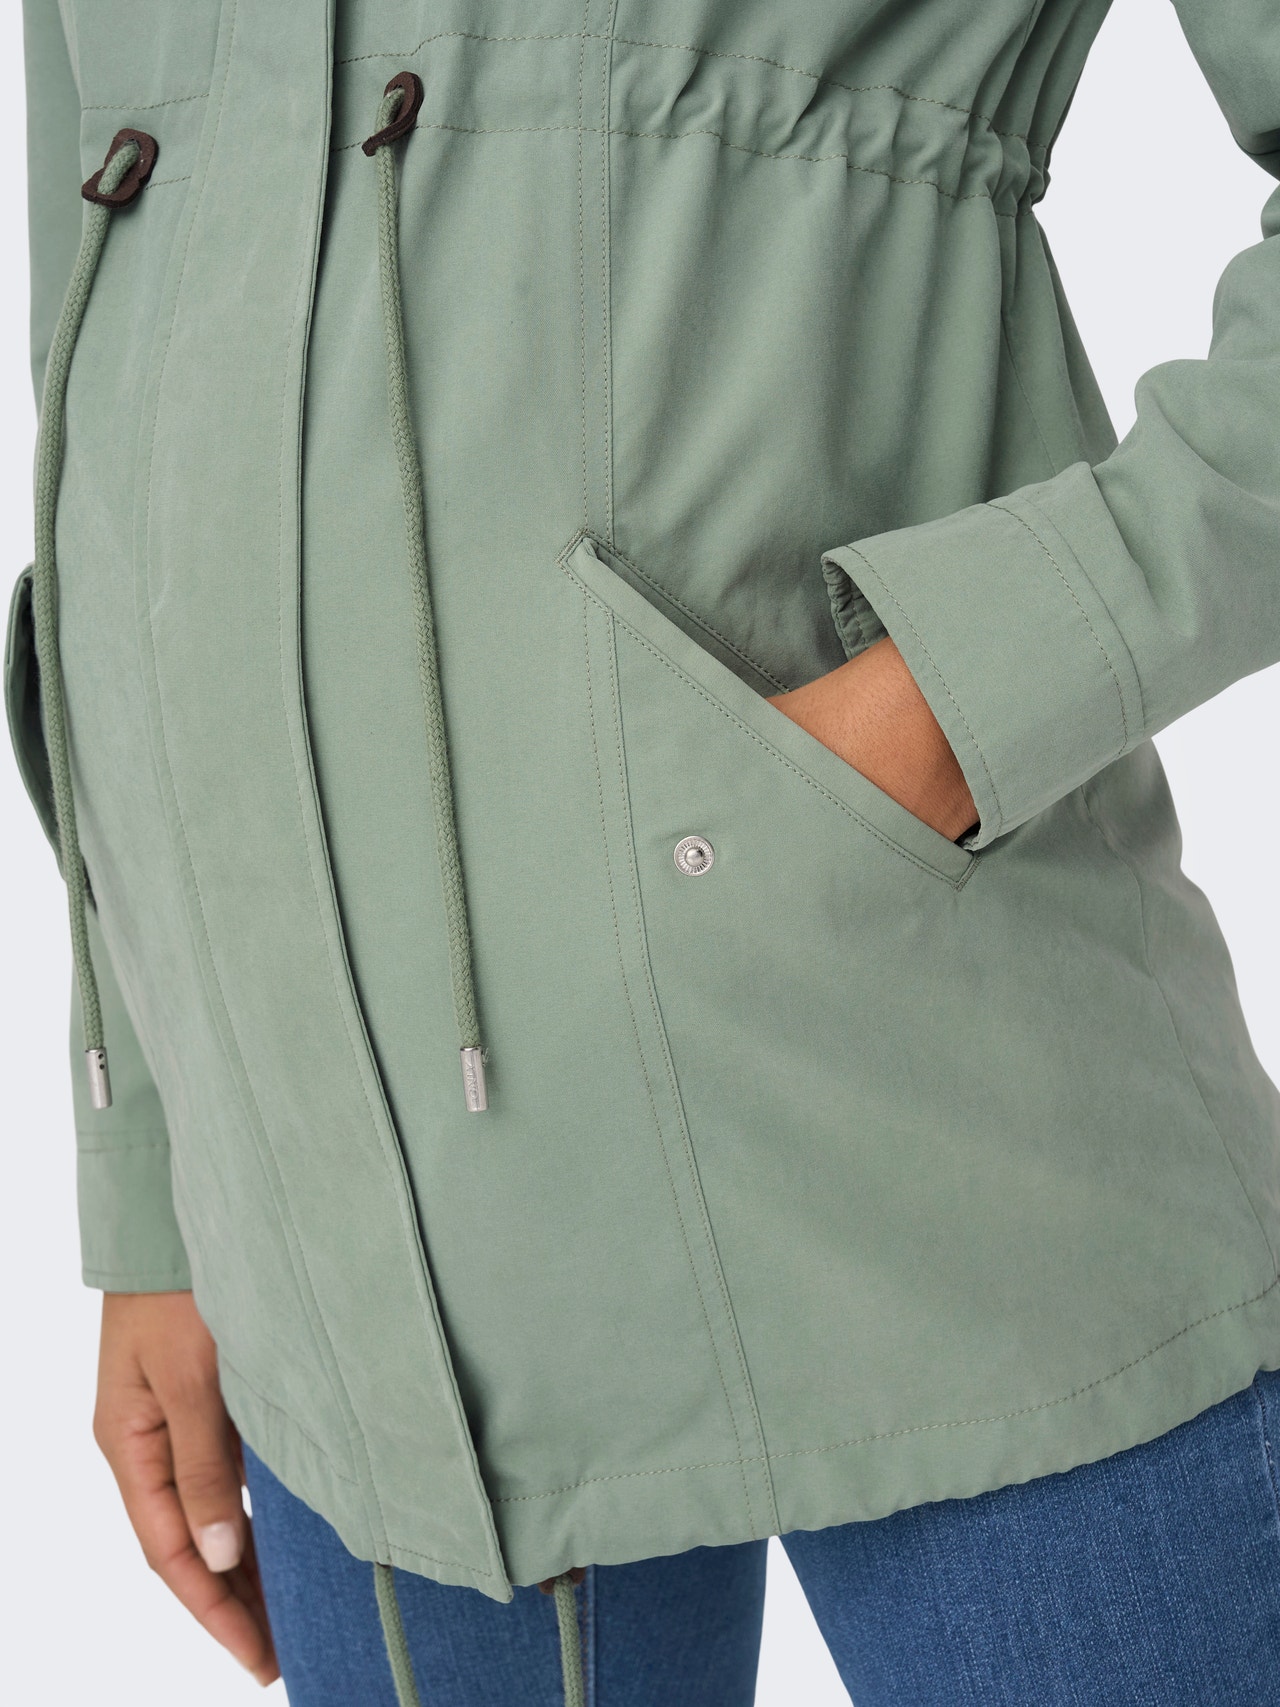 ONLY Vestes Capuche Grossesse -Hedge Green - 15294129